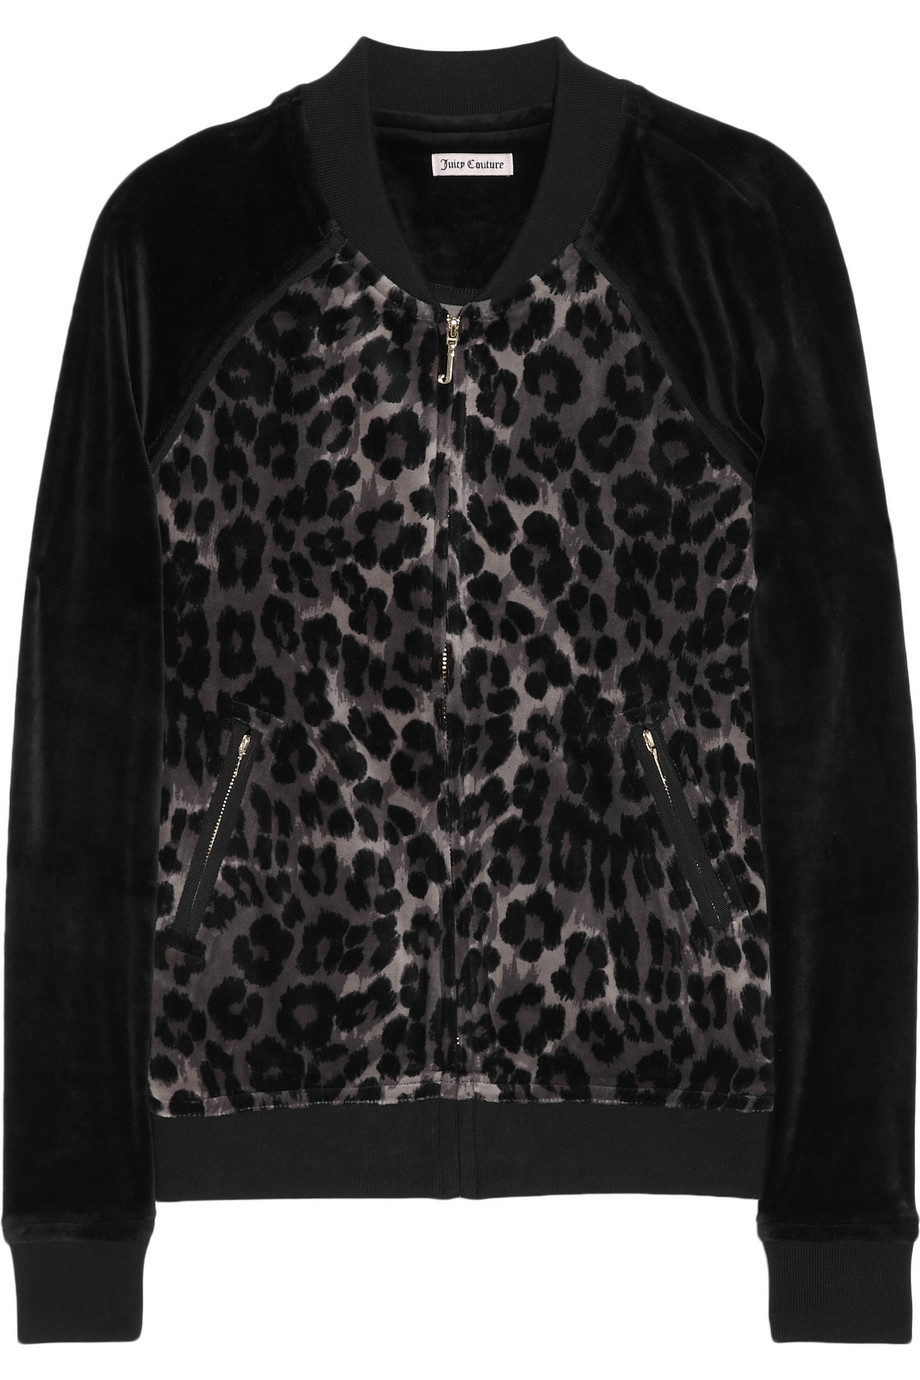 Juicy Couture Bowie Leopardprint Velour Bomber Jacket in Black - Lyst